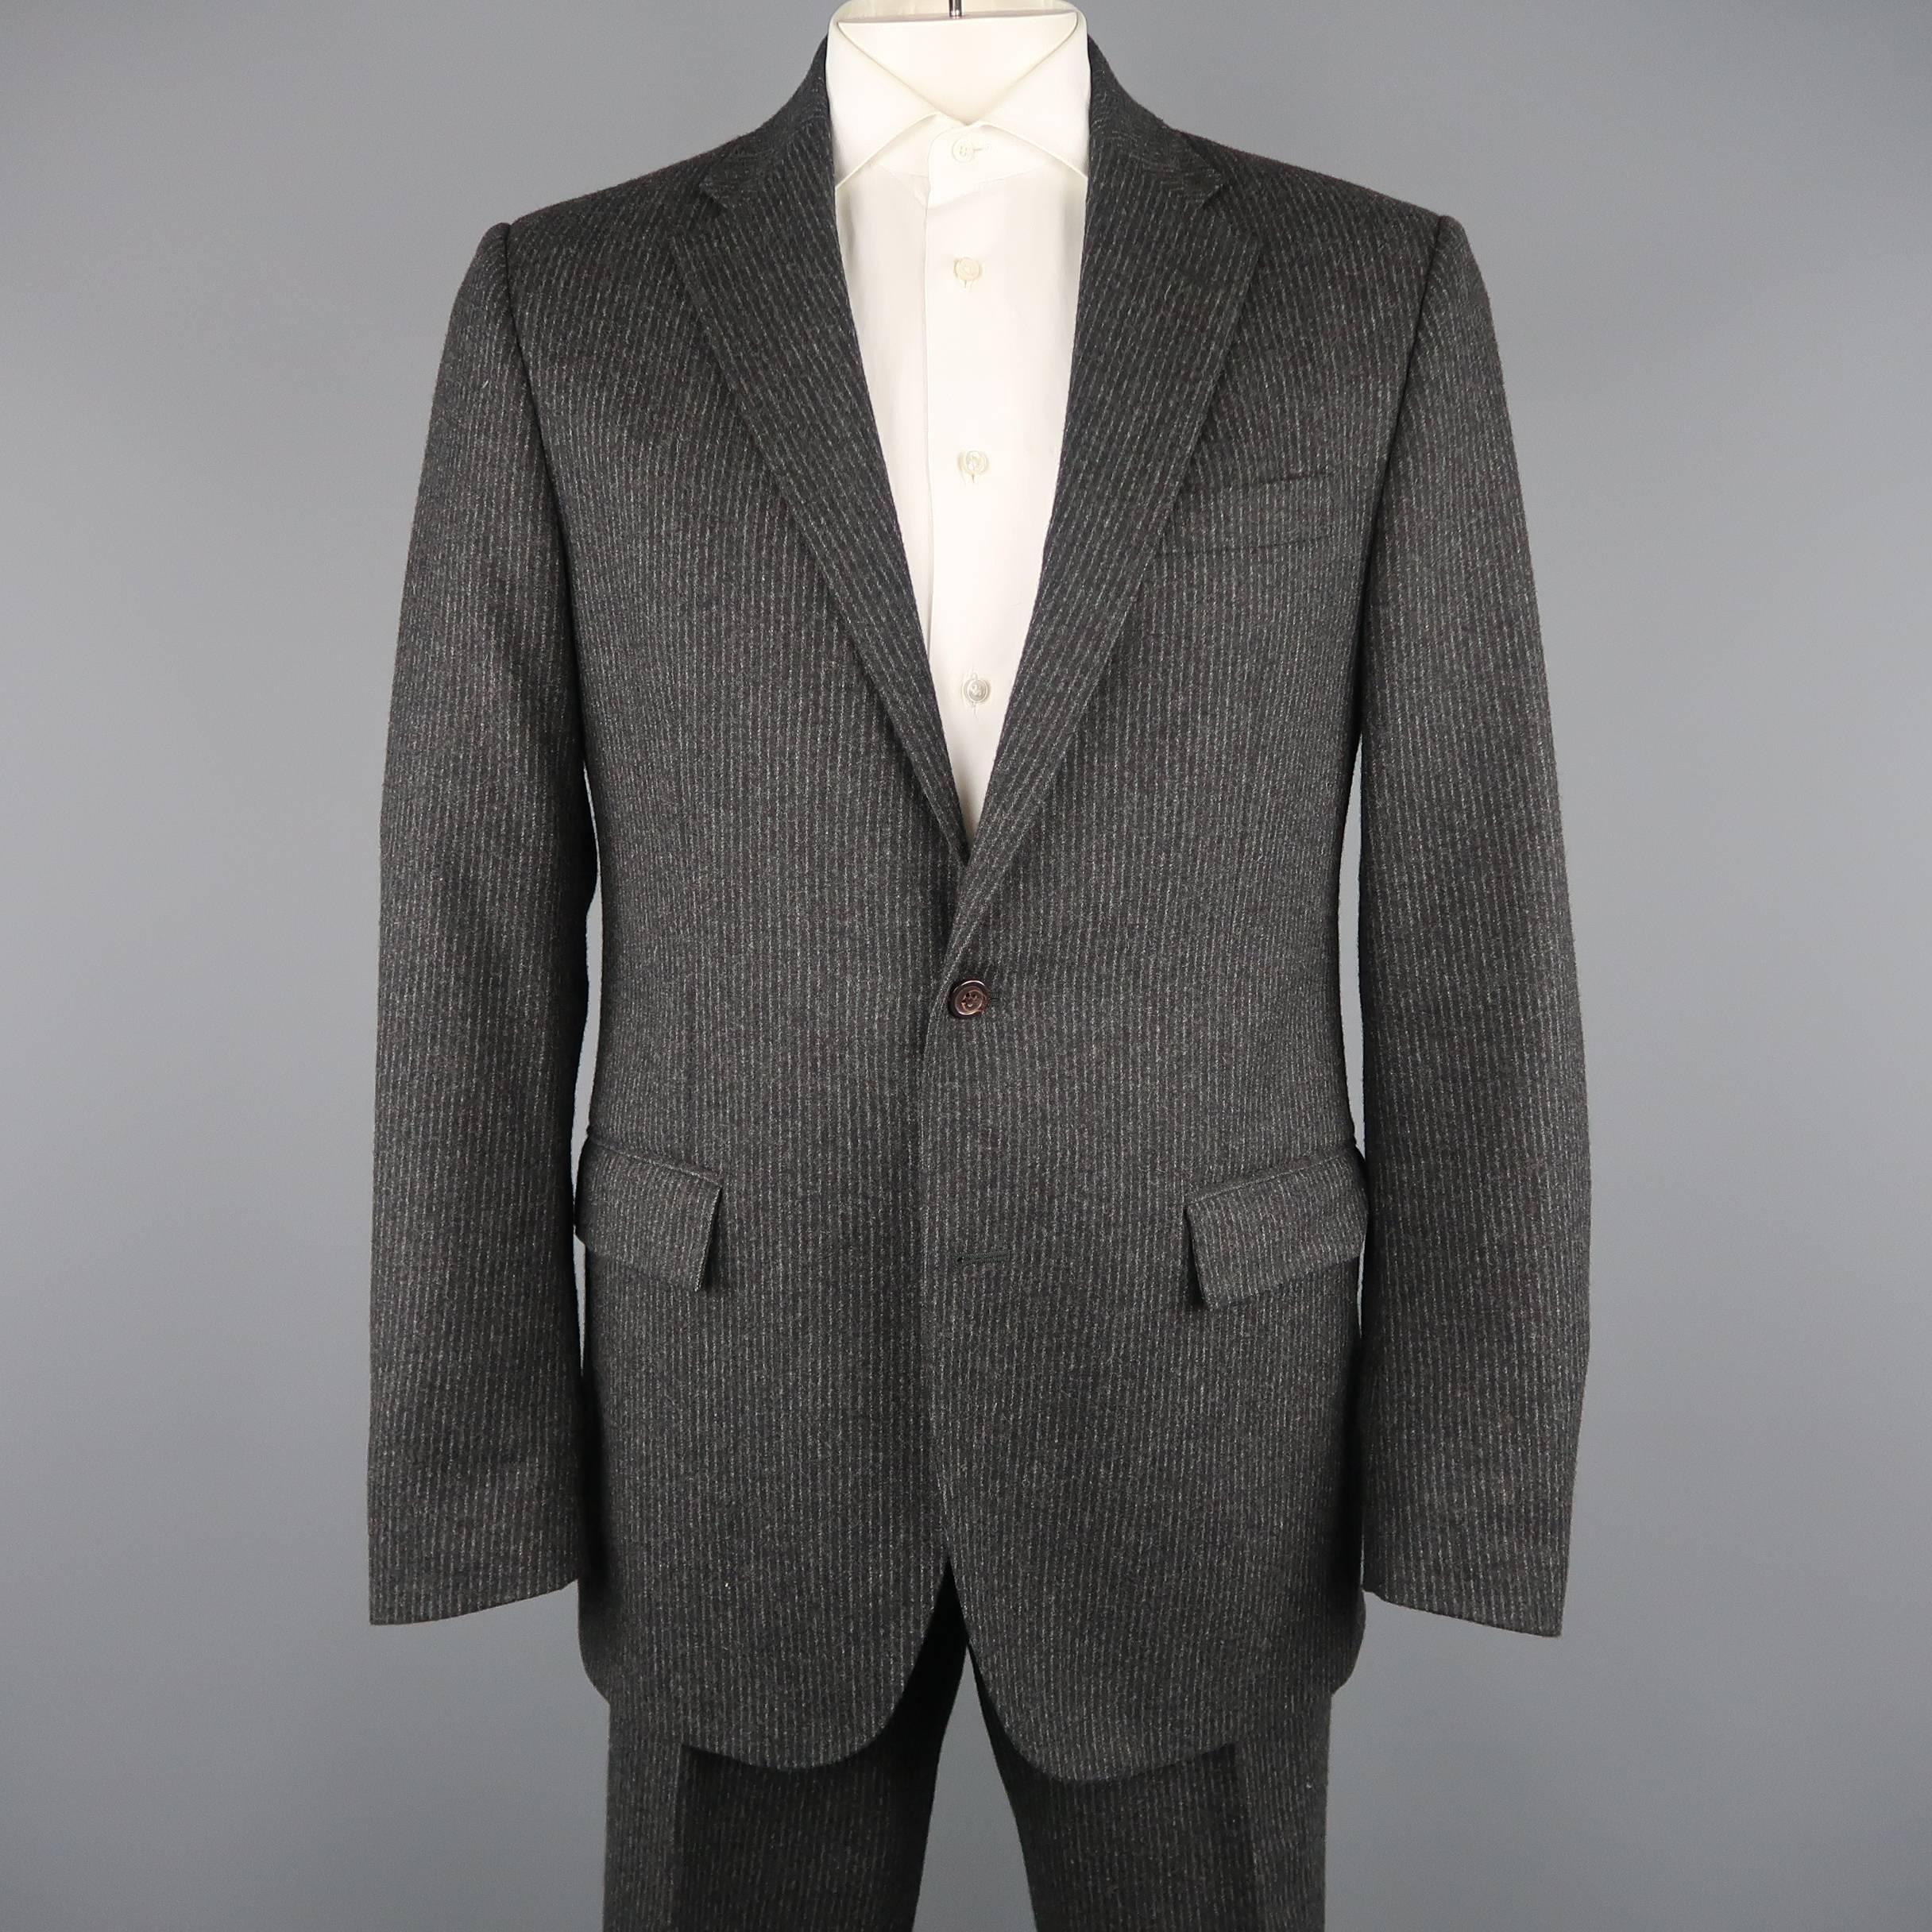 Polo Ralph Lauren suit comes in a charcoal pinstripe wool cashmere felt and includes a single breasted, two button, notch lapel sport coat with matching cuffed hem trousers. Made in Italy.
 
Excellent Pre-Owned Condition.
Marked: 42
 
Measurements:
